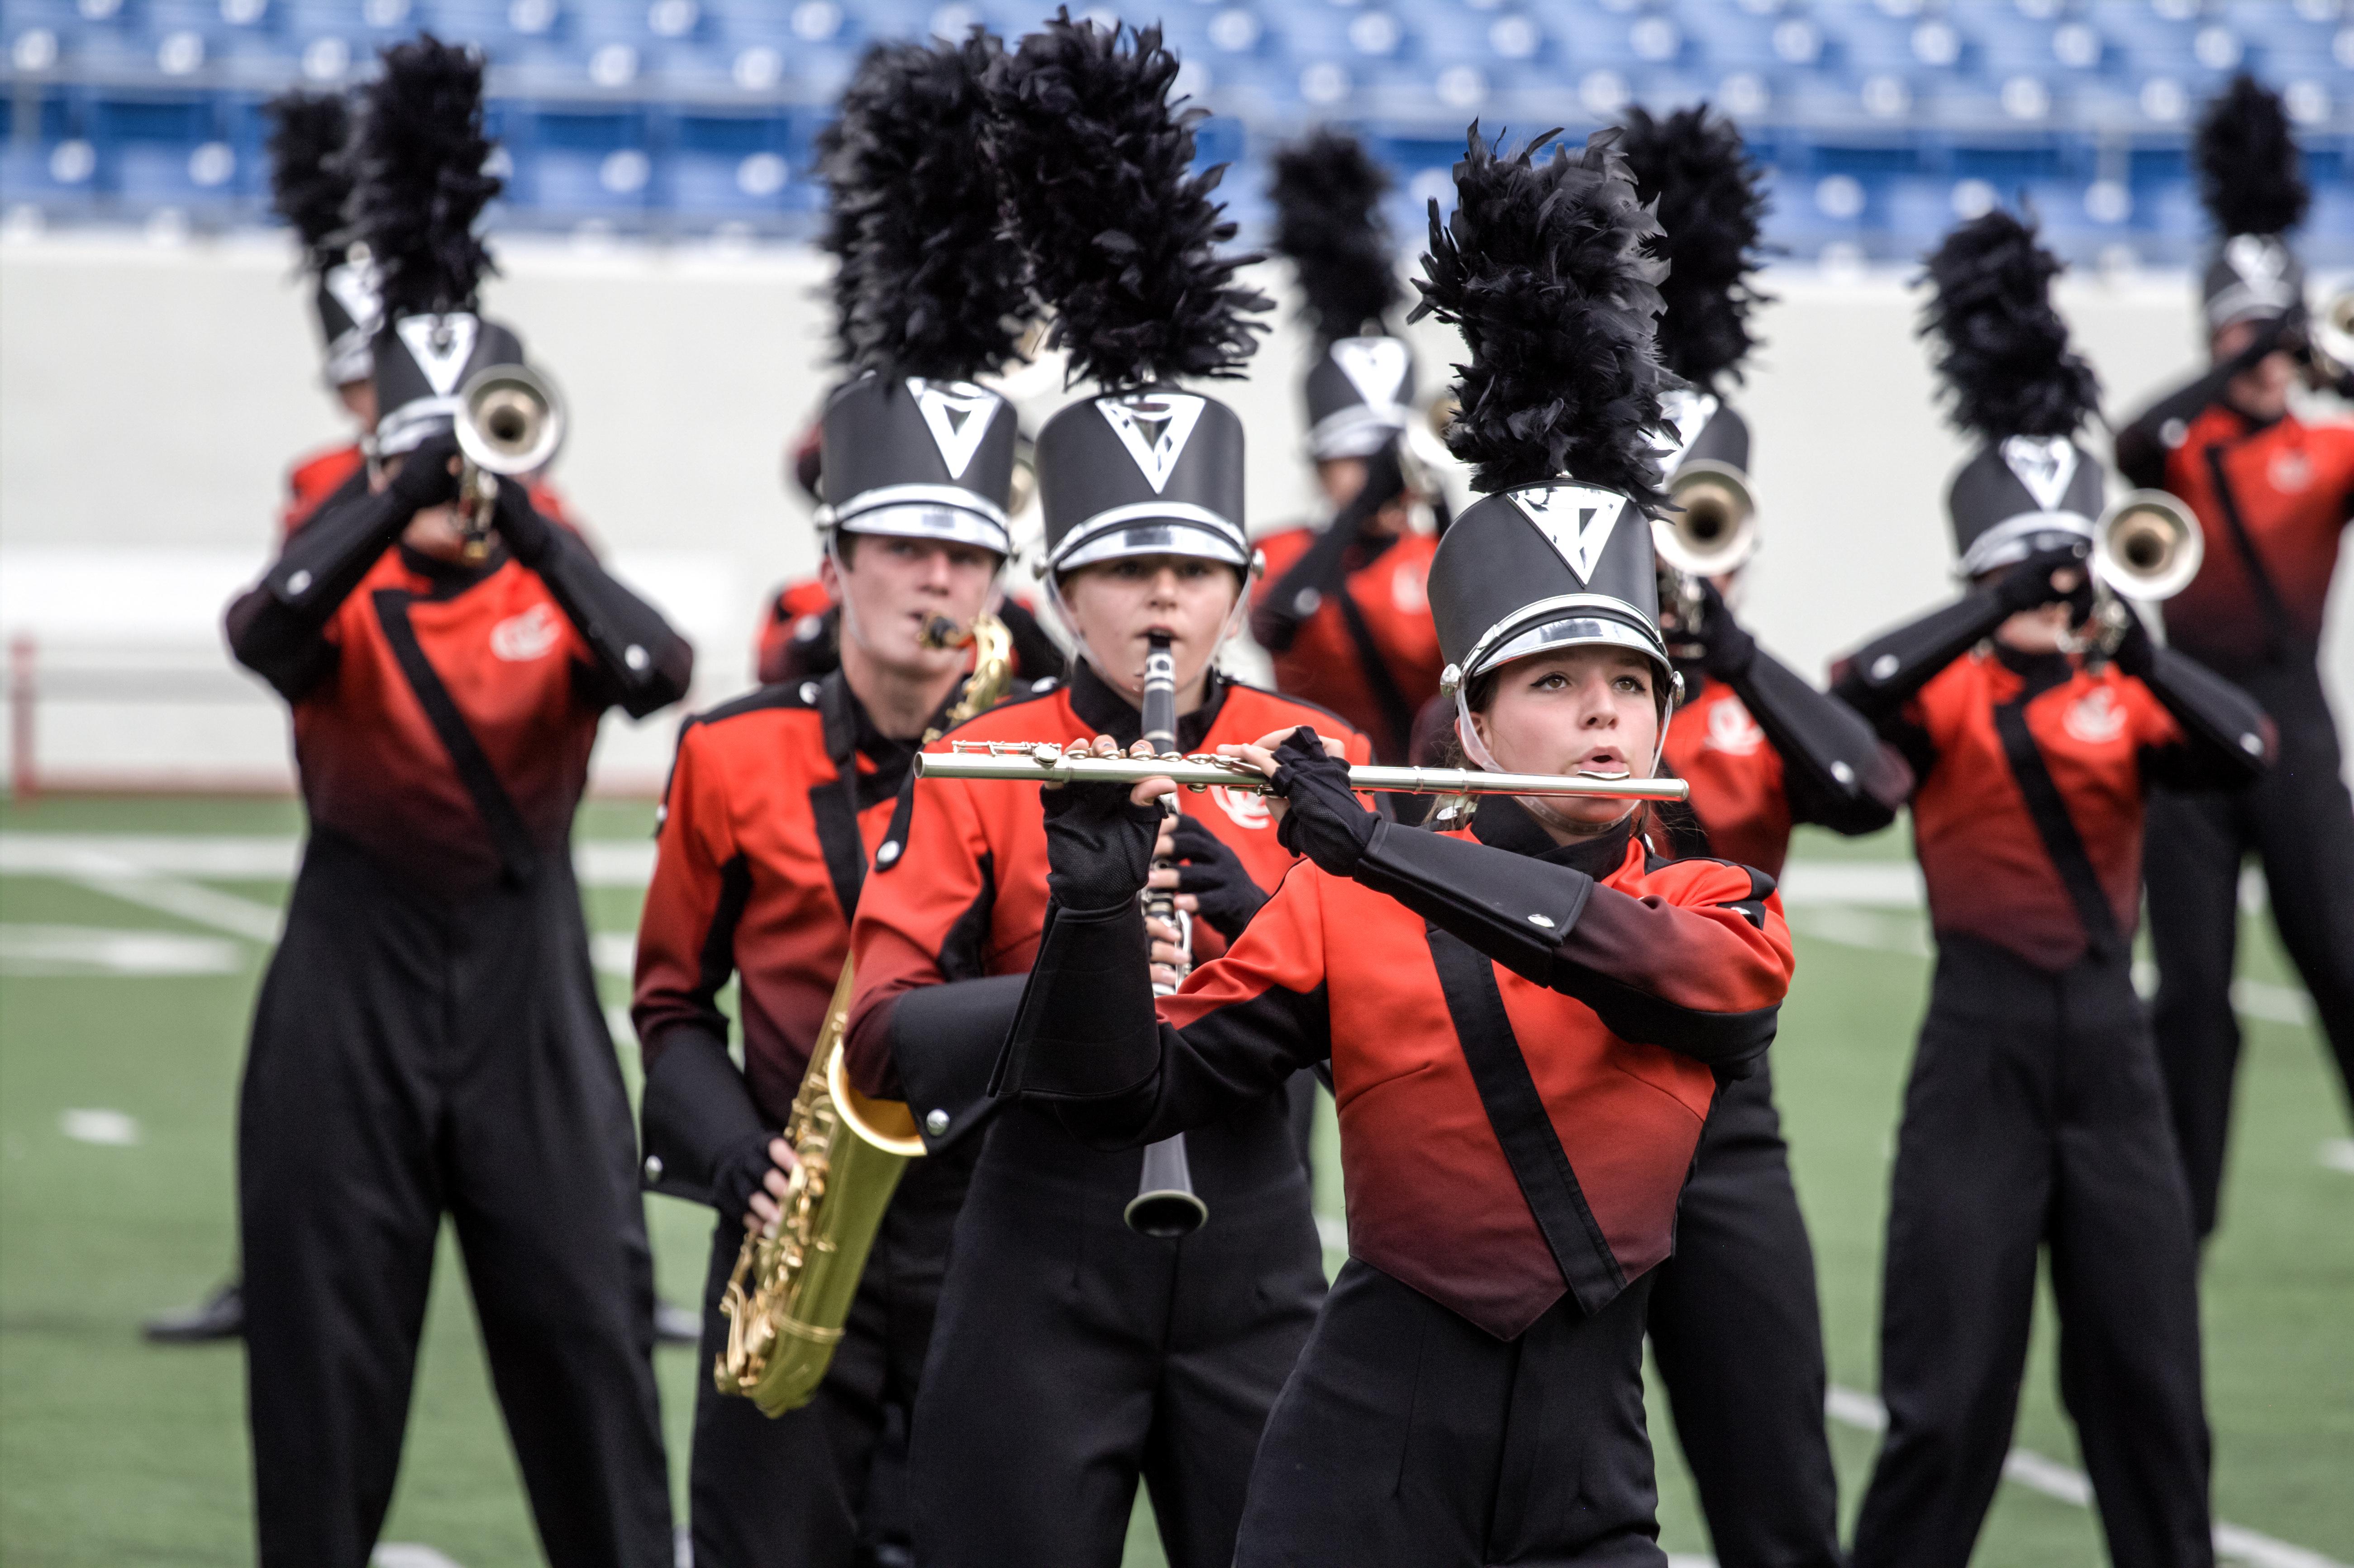 Queen City’s Band of Champions places 4th at UIL State Marching Contest